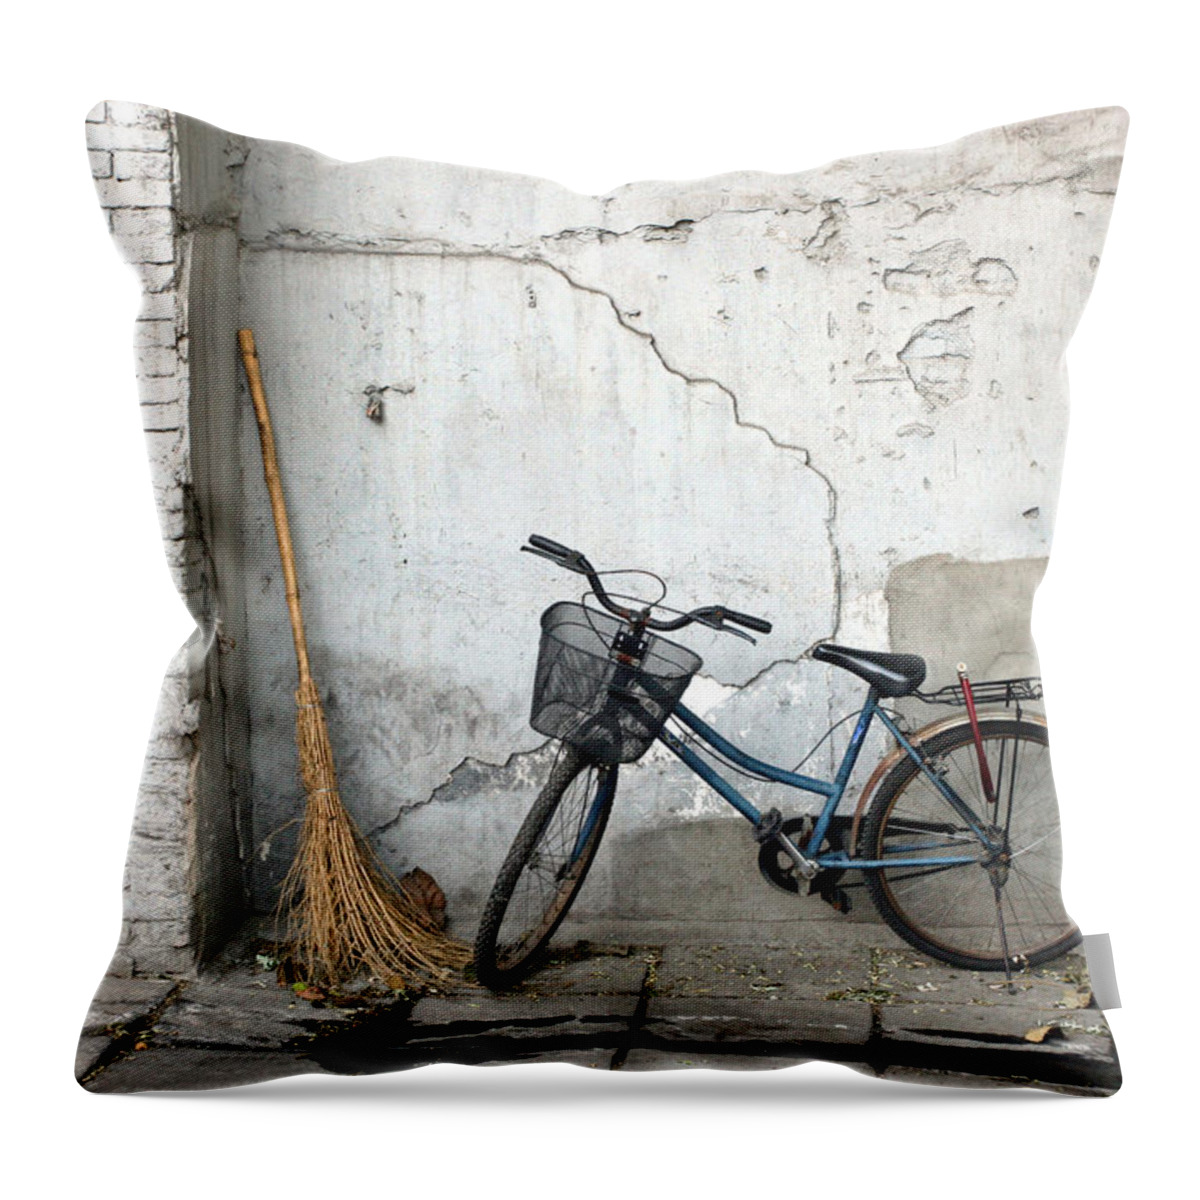 Broom Throw Pillow featuring the photograph Broom and Bike by Glennis Siverson